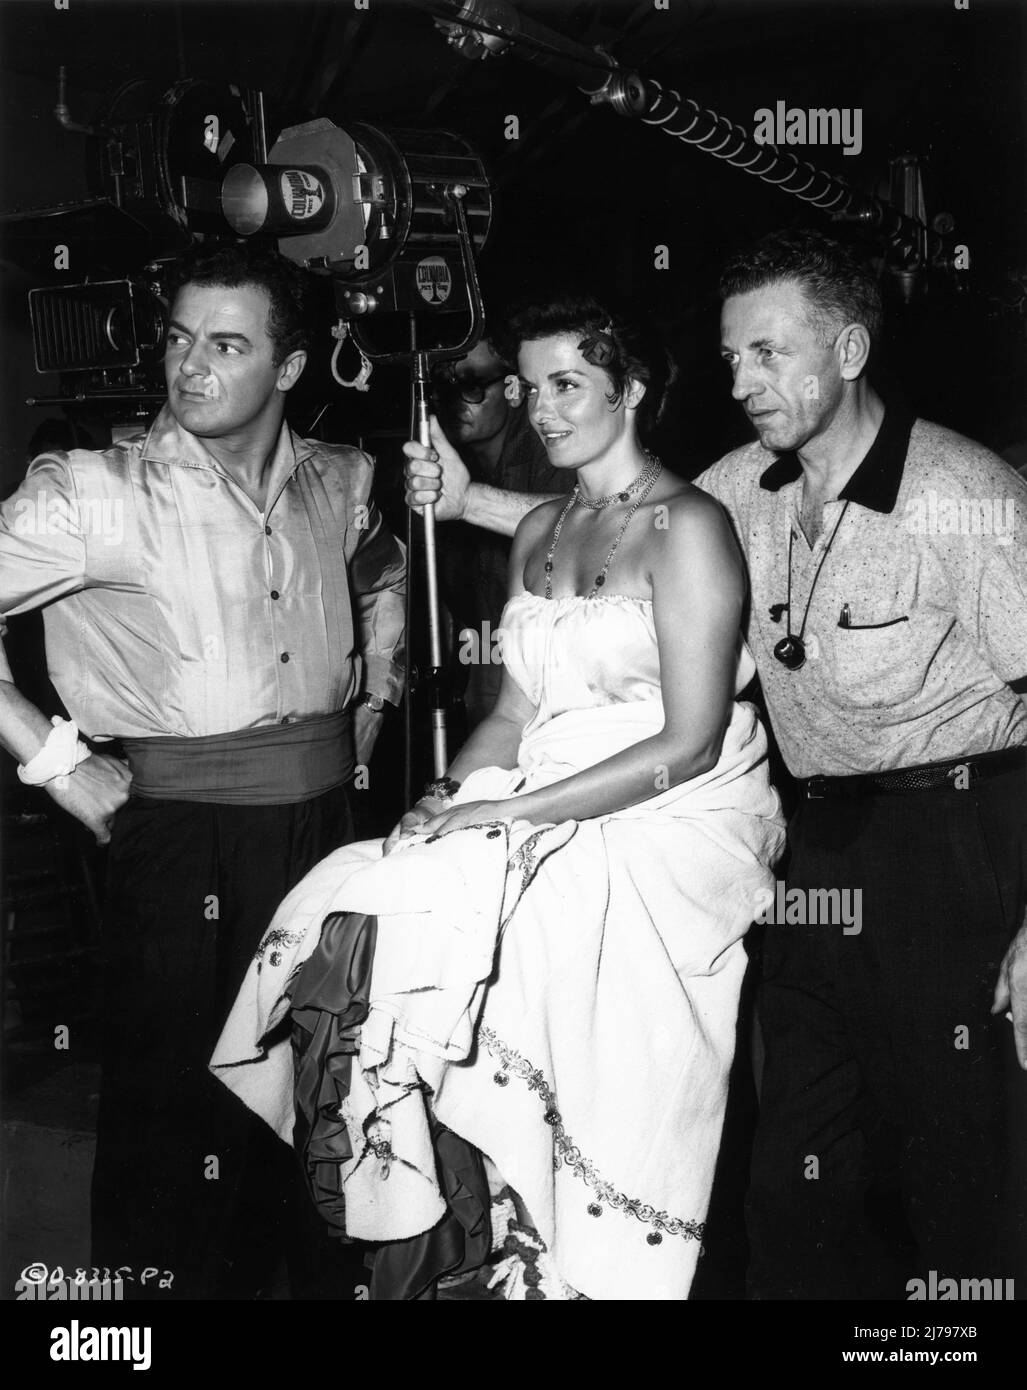 CORNEL WILDE JANE RUSSELL and Director NICHOLAS RAY on set candid during filming of HOT BLOOD 1956 story Jean Evans screenplay Jesse Lasky Jr. music Les Baxter cinematographer Ray June Columbia Pictures Stock Photo